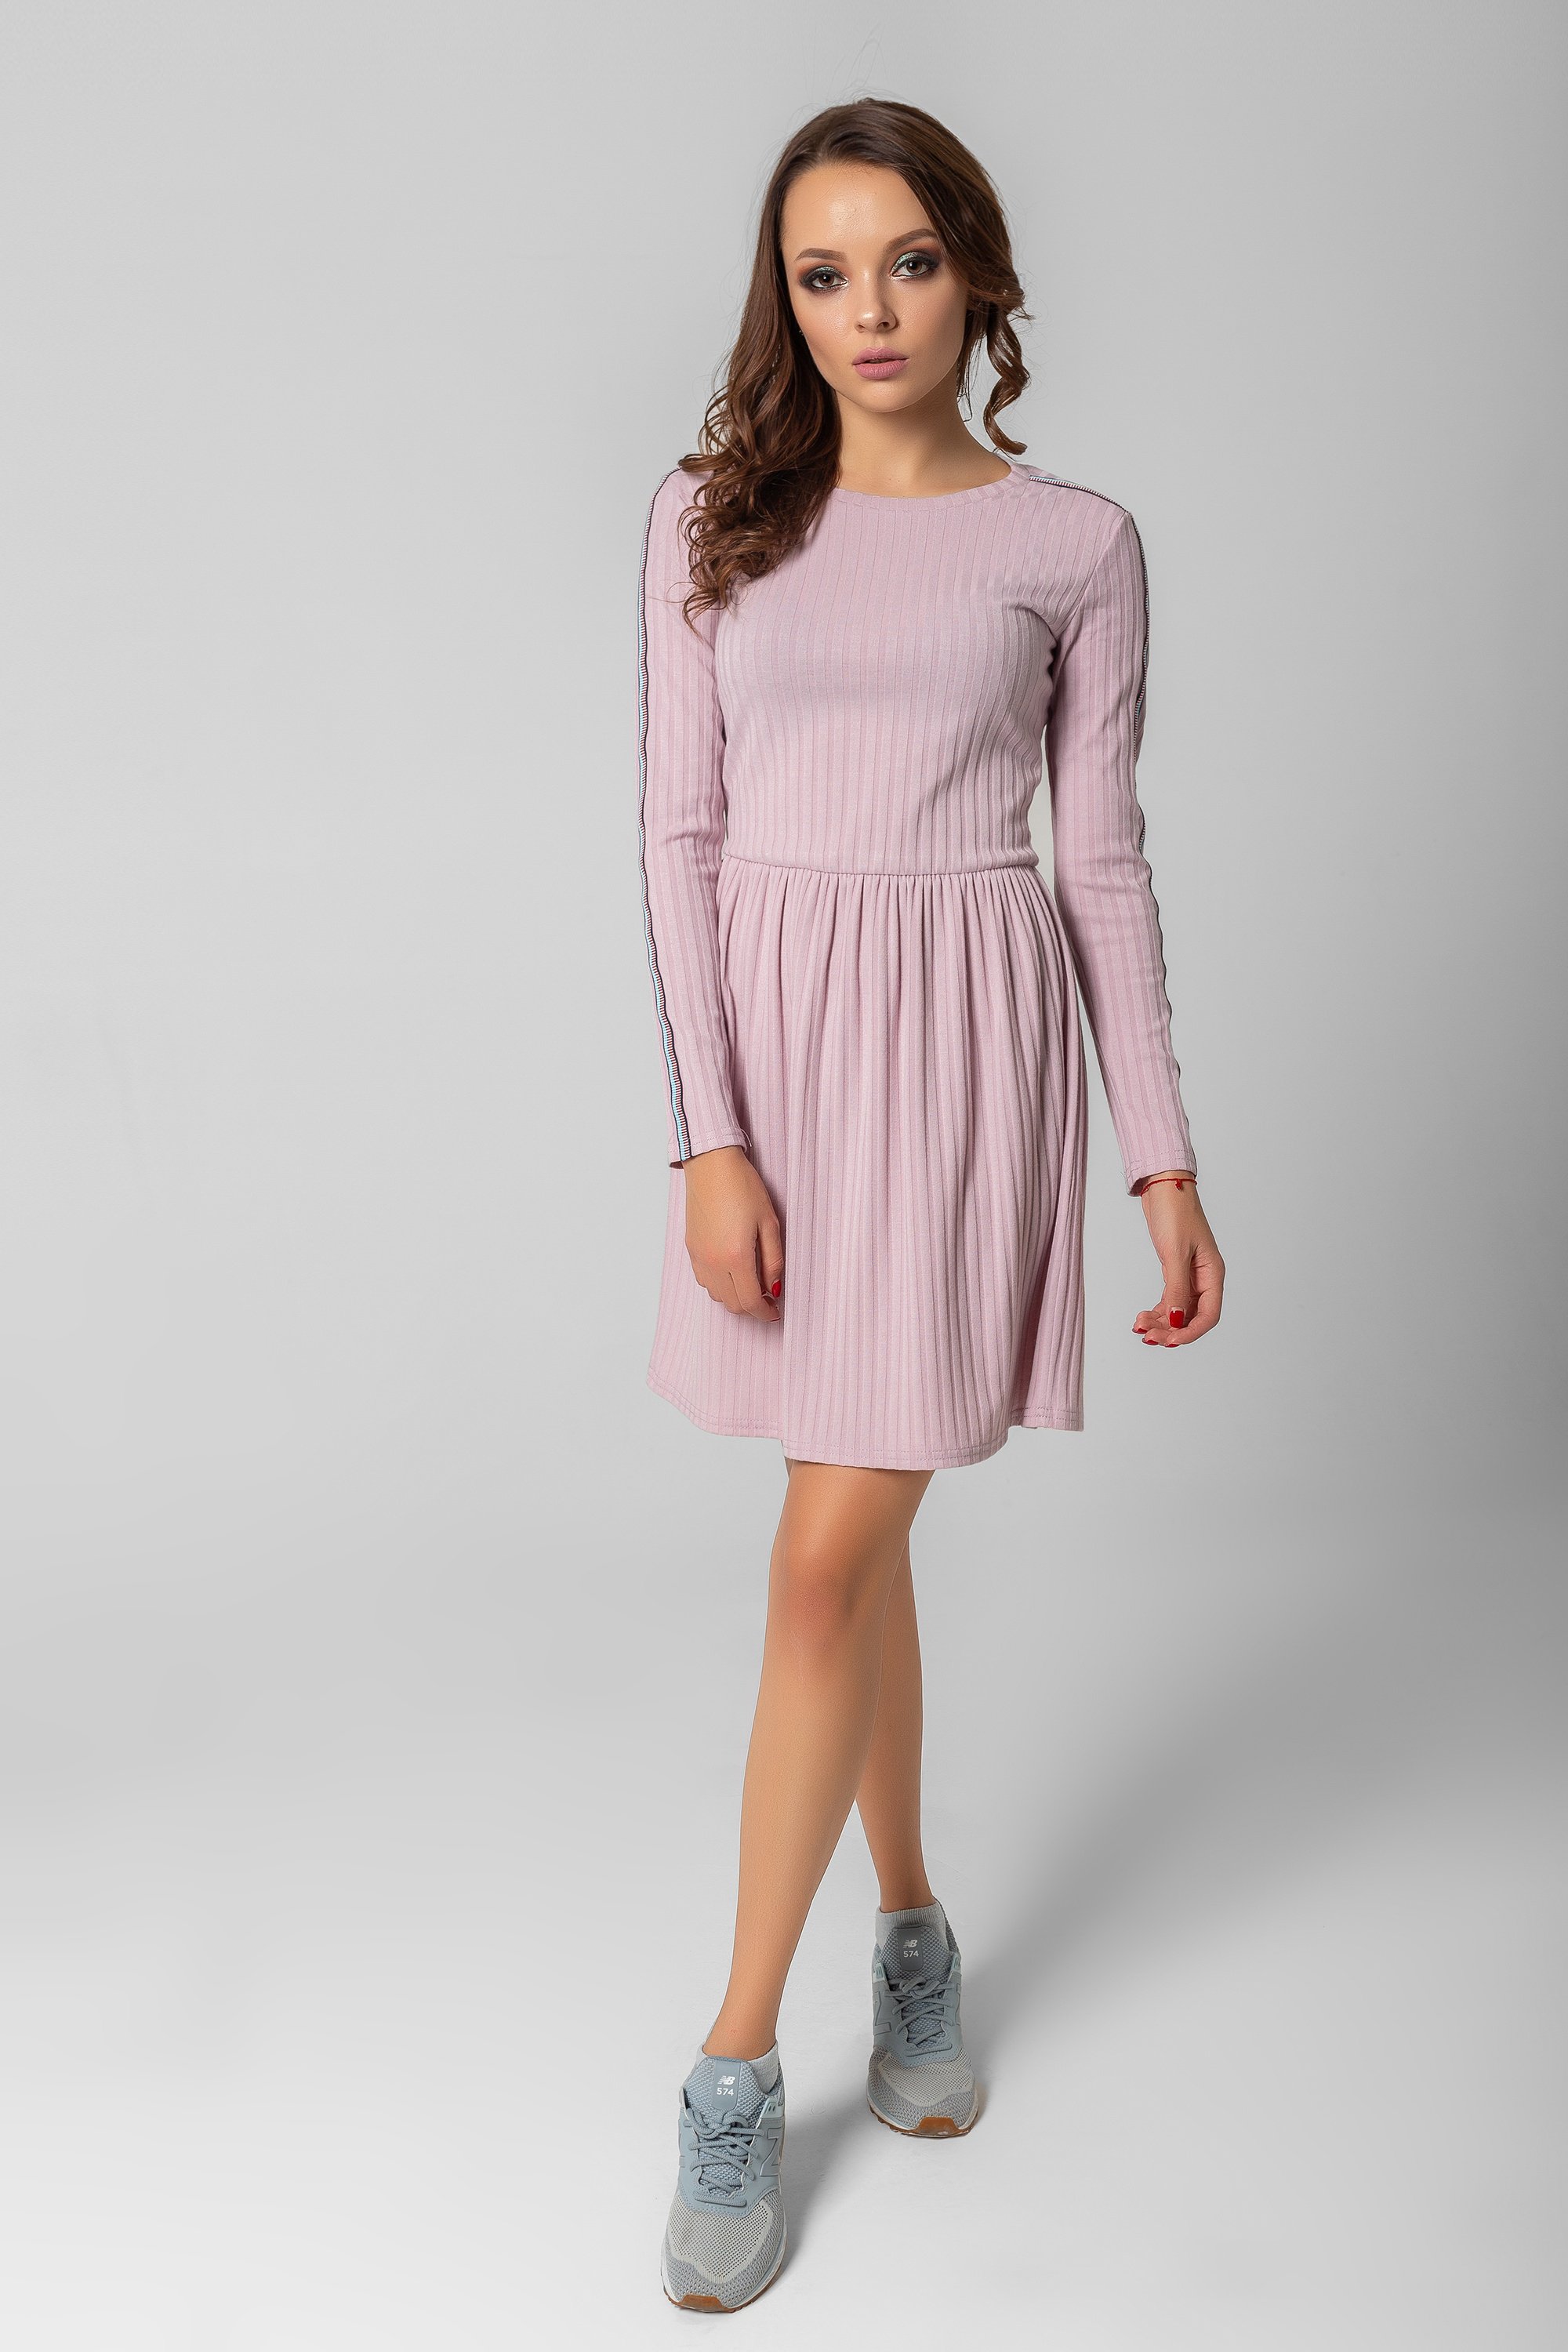 Knitted dress in powder colour